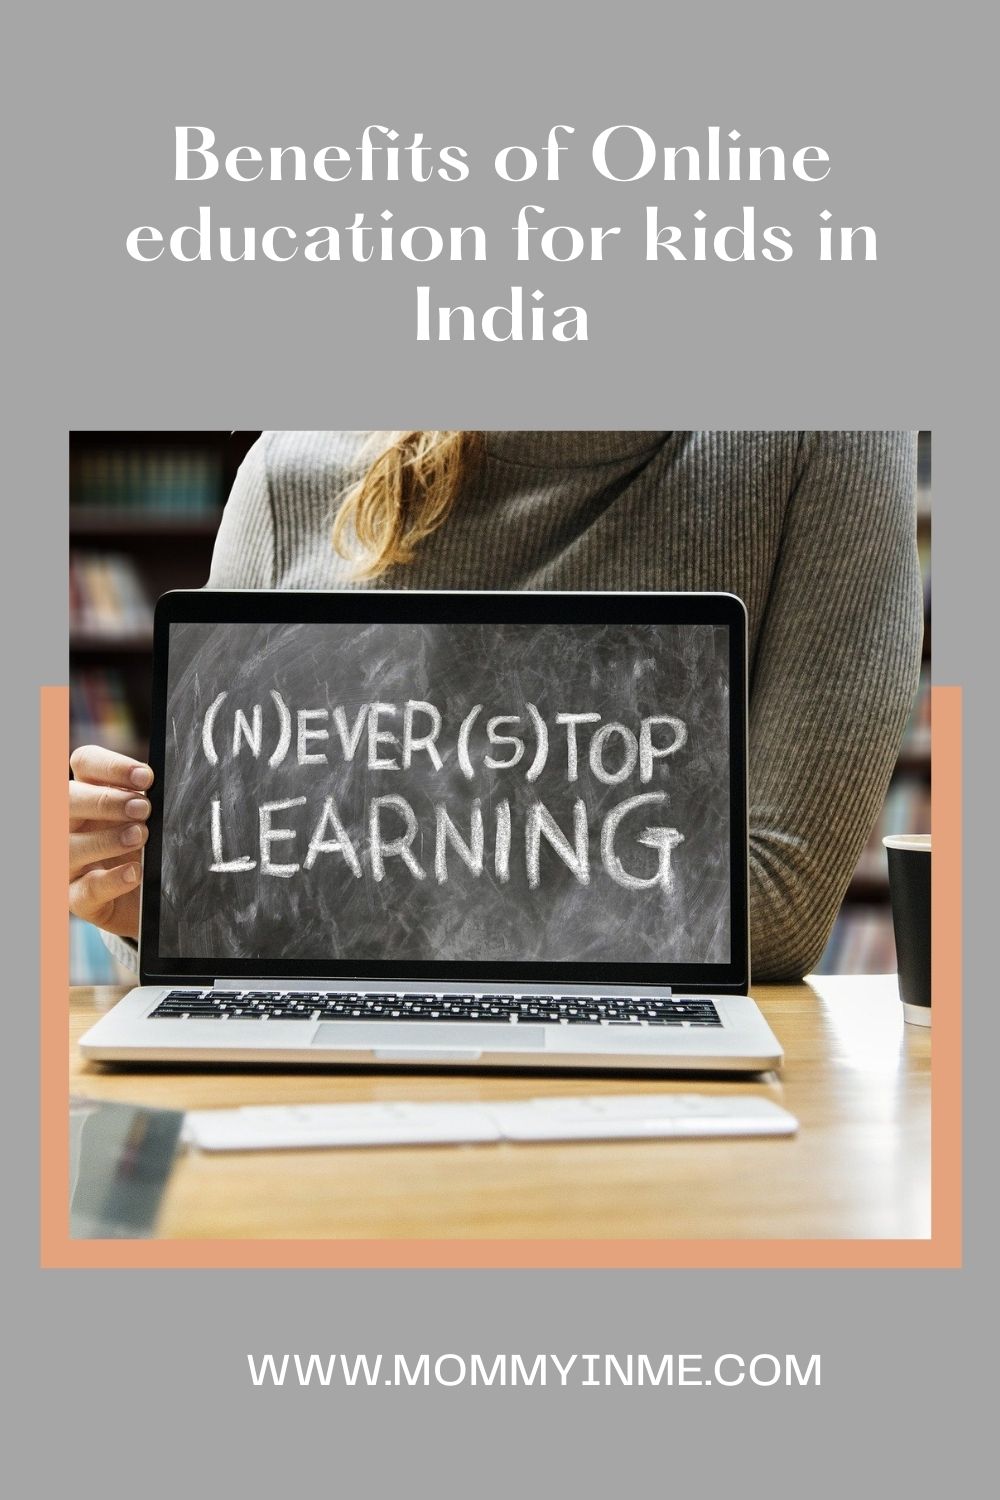 With COVID-19 bringing in the New Normal, what are the benefits of Online education for kids in India? It is affordable, more engaging and flexible. Read the advantages of Online Education for Kids in India. #Onlineeducationforkids #OnlineschoolsinIndia #AlwaysonLearningschool #benefitsofOnlineeducation #OnlineCBSESchool #AOLSchool